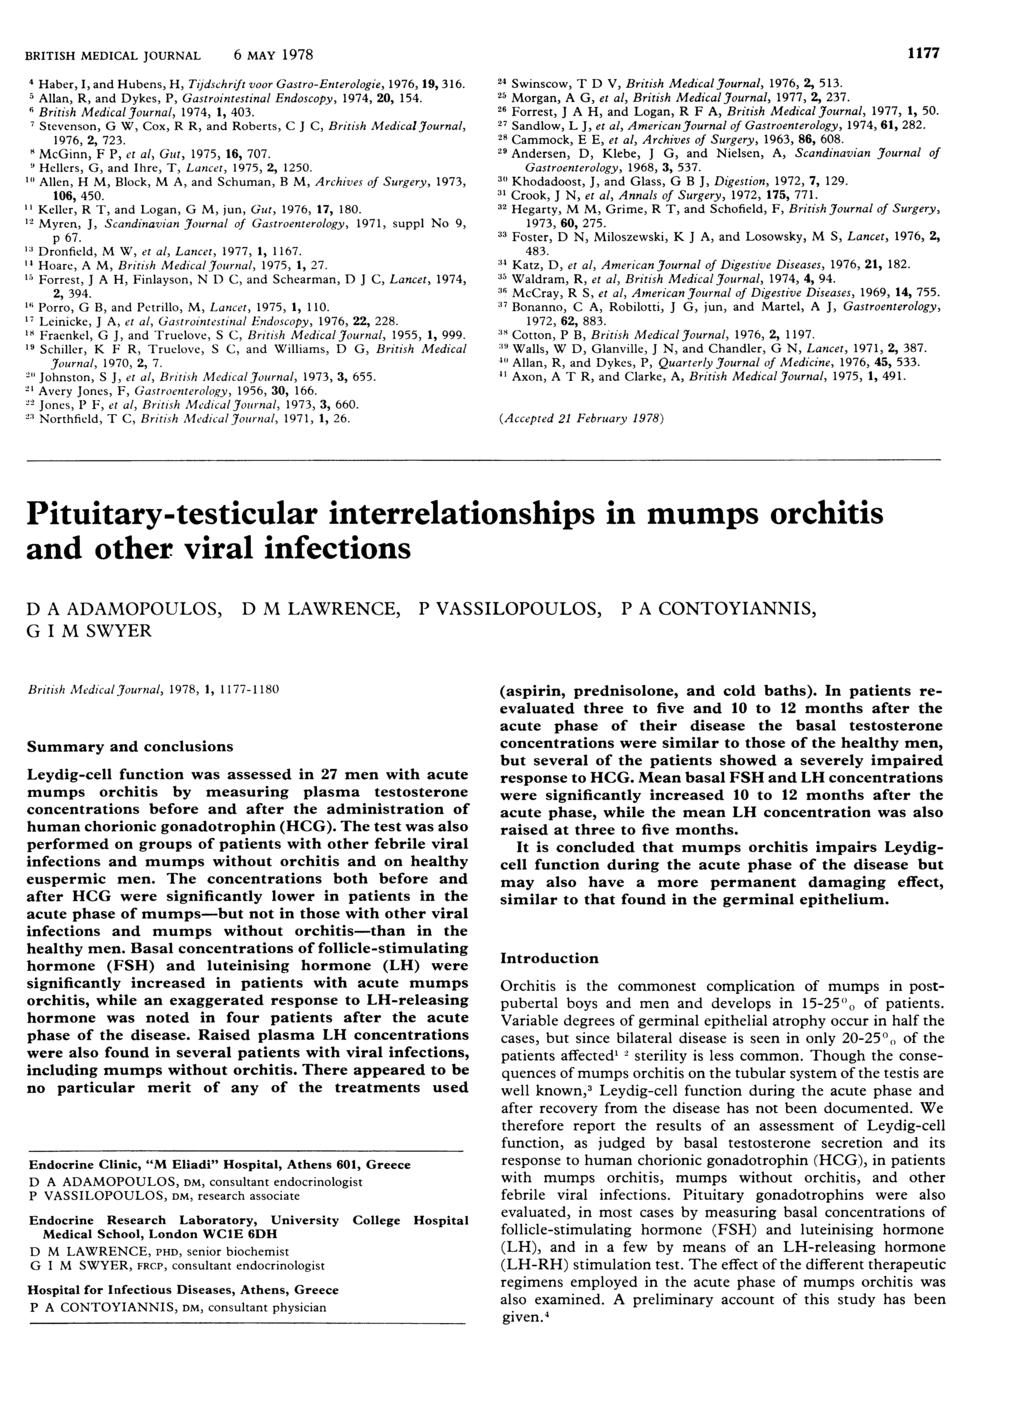 BRITISH MEDICAL JOURNAL 6 MAY 1978 1177 4Haber, I, and Hubens, H, Tujdschrift voor Gastro-Enterologie, 1976, 19, 316. 5Allan, R, and Dykes, P, Gastrointestinal Endoscopy, 1974,, 154.